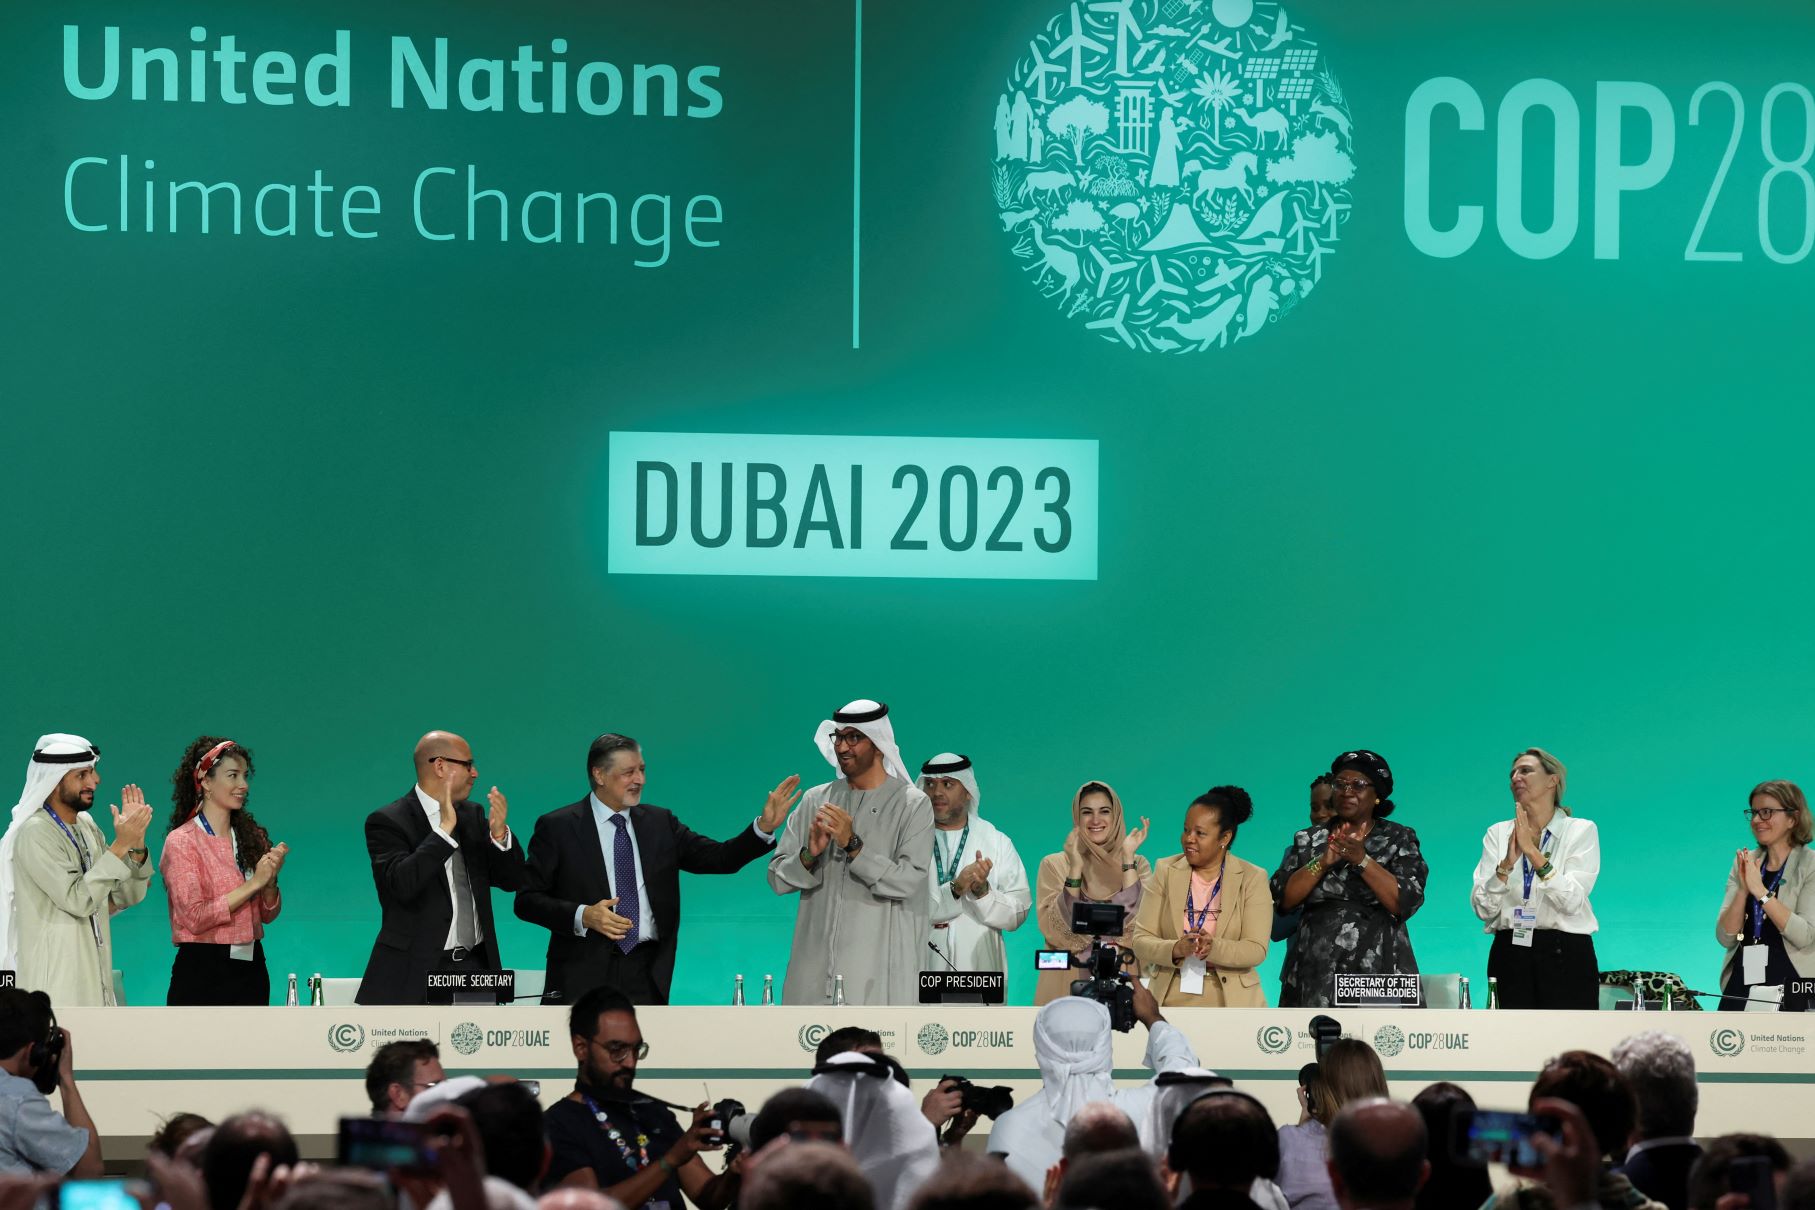 COP28 President Sultan Ahmed Al Jaber stands and applauds on stage with other dignitaries in front of a giant green backdrop at the plenary at the UN Climate Change Conference in Dubai, United Arab Emirates on December 13, 2023. REUTERS/Amr Alfiky